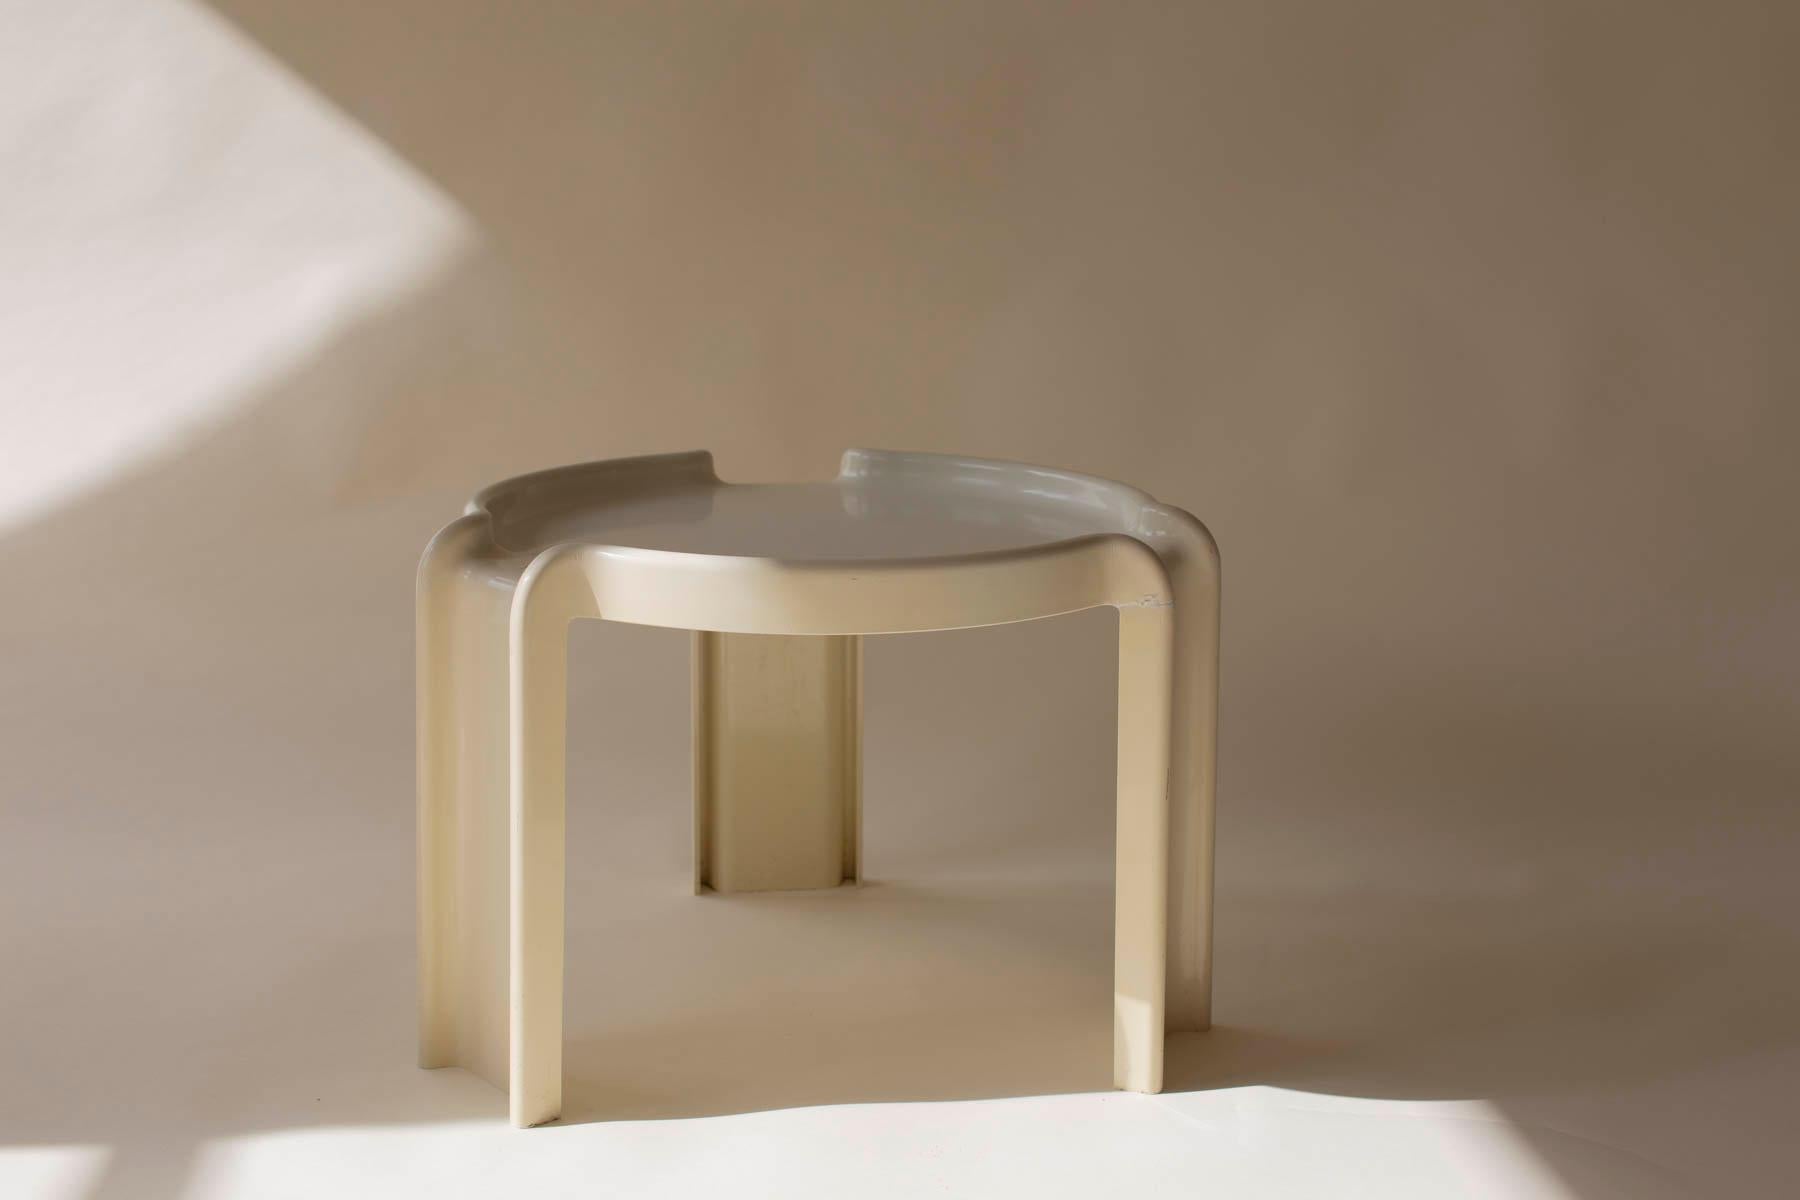 The table features a round top made of white colored plastic, supported by three legs made plastic. 

The Nesting Tables by Giò Ponti Stoppino for Kartell is part of a set of three tables designed by the Italian architect and designer Gio Ponti in